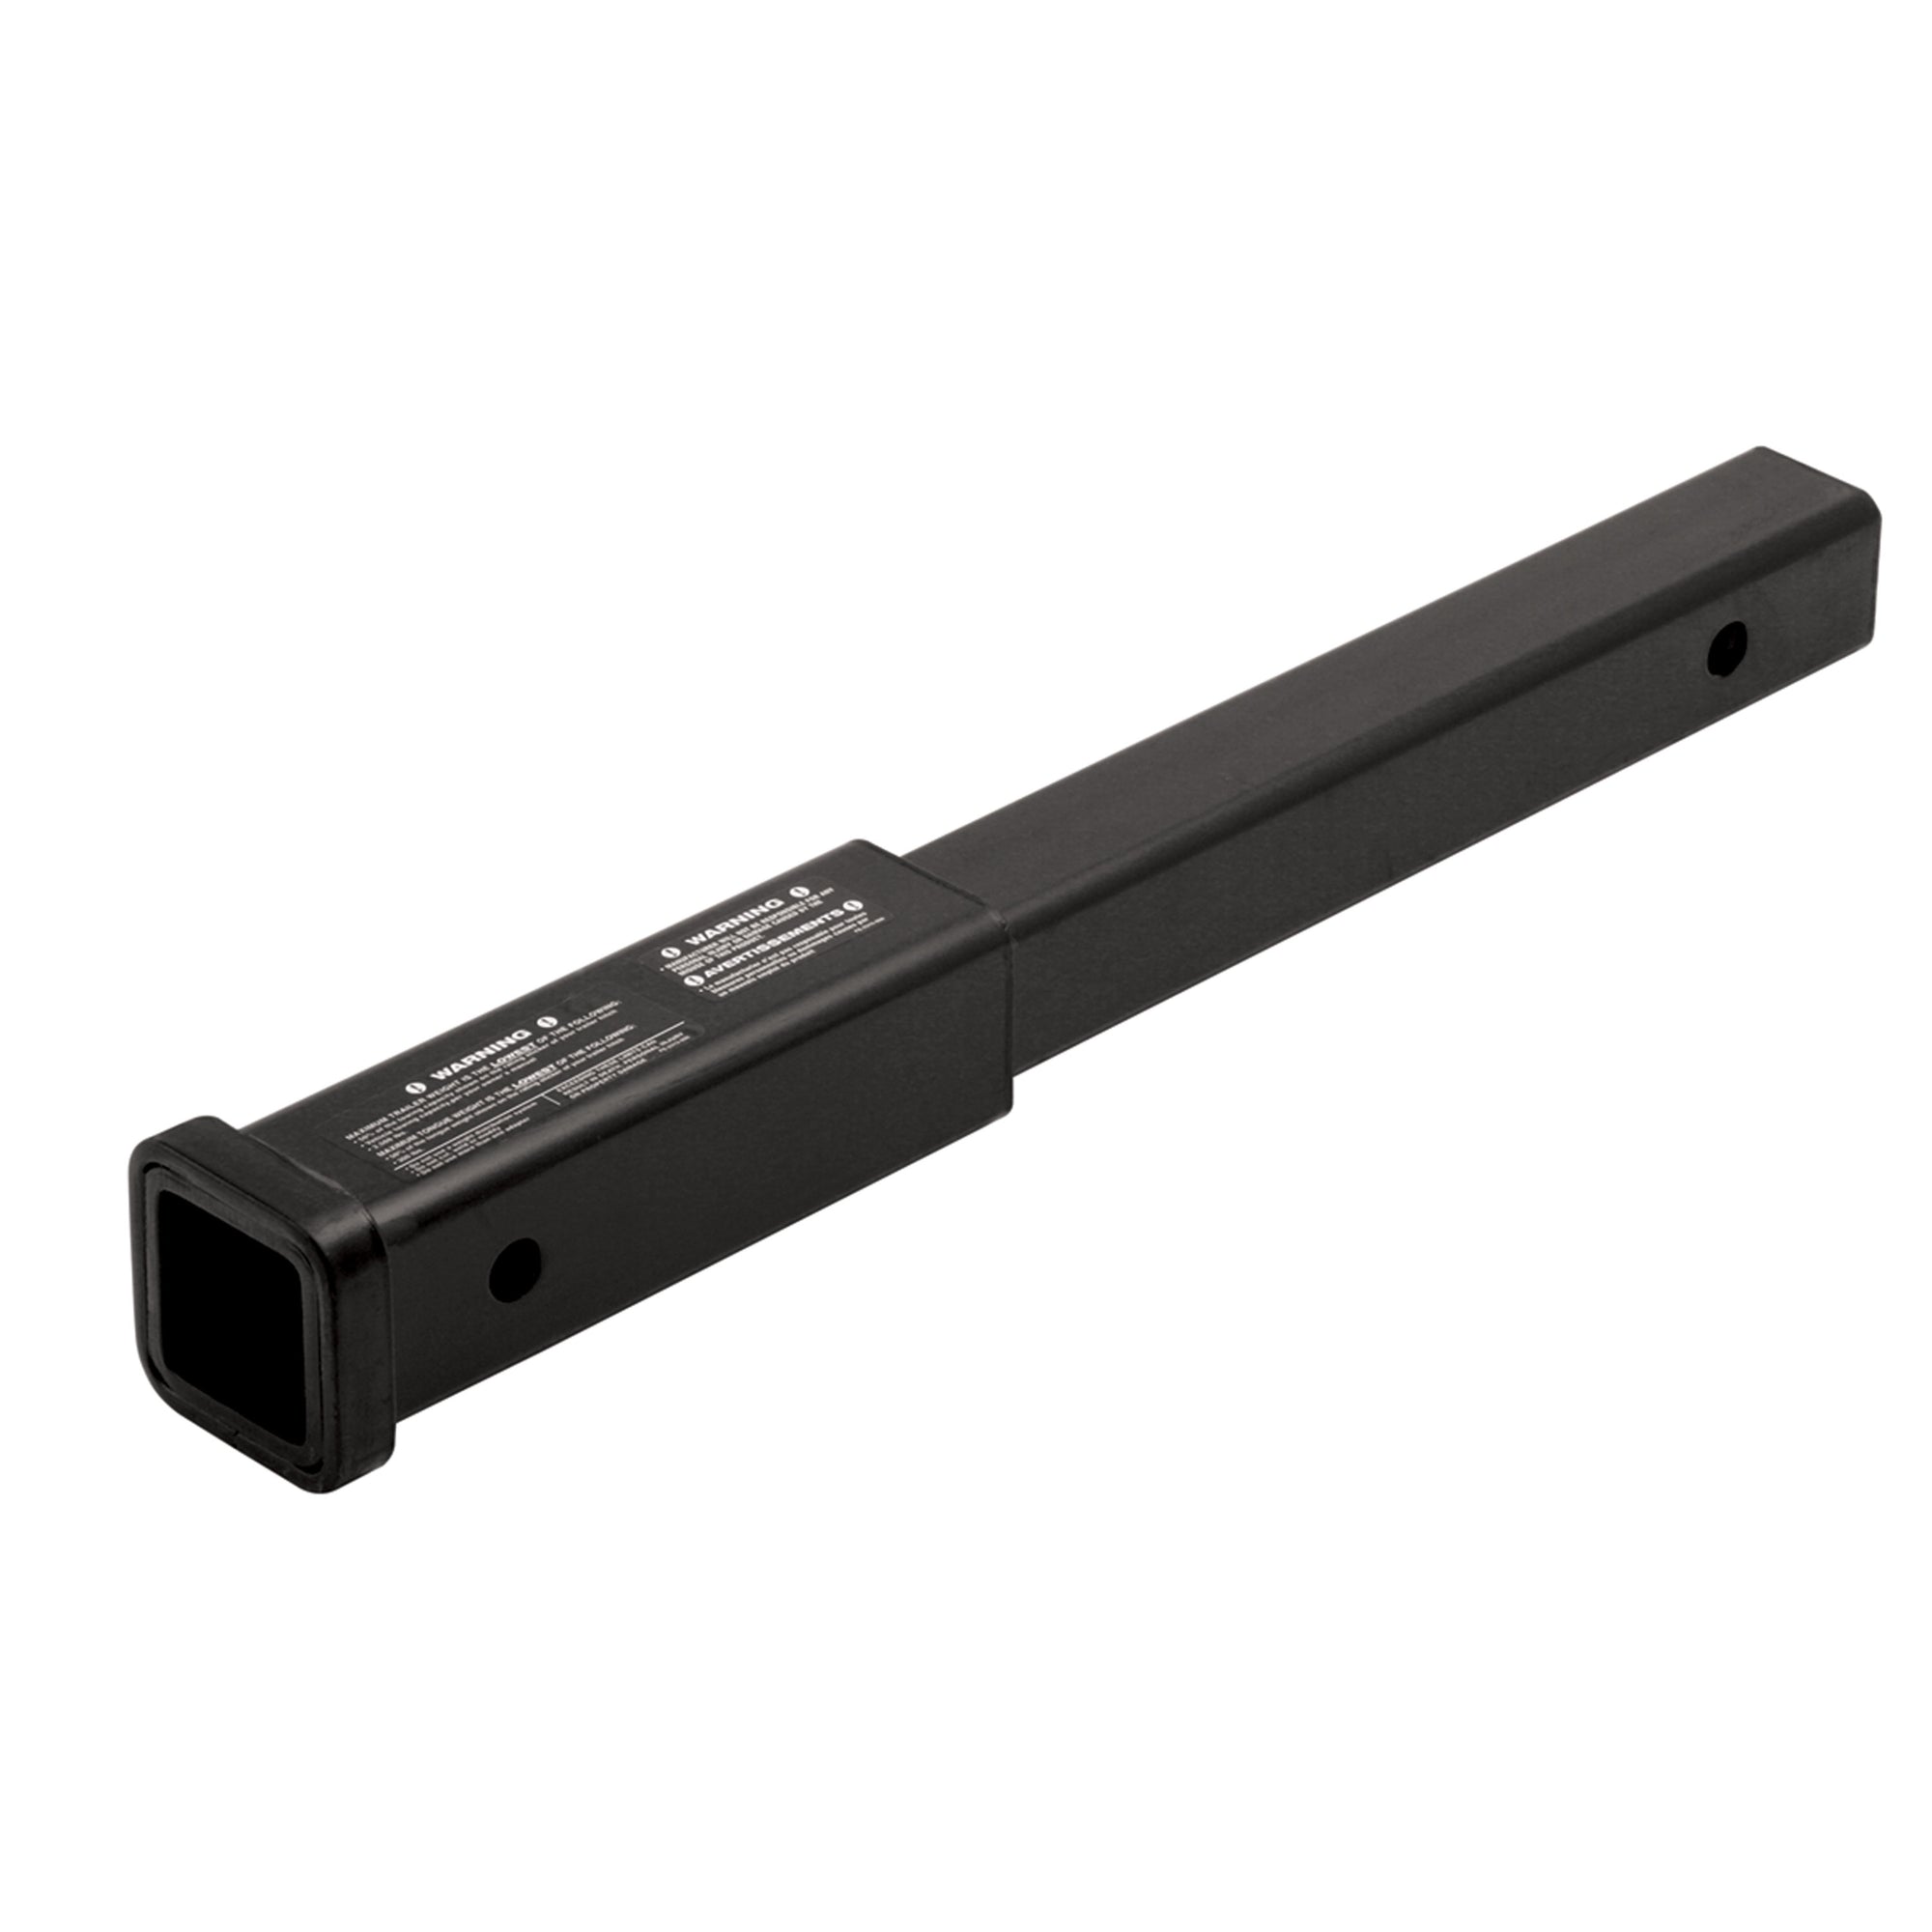 Reese 80306 Receiver Extension - 18" Length, 3,500 lbs.